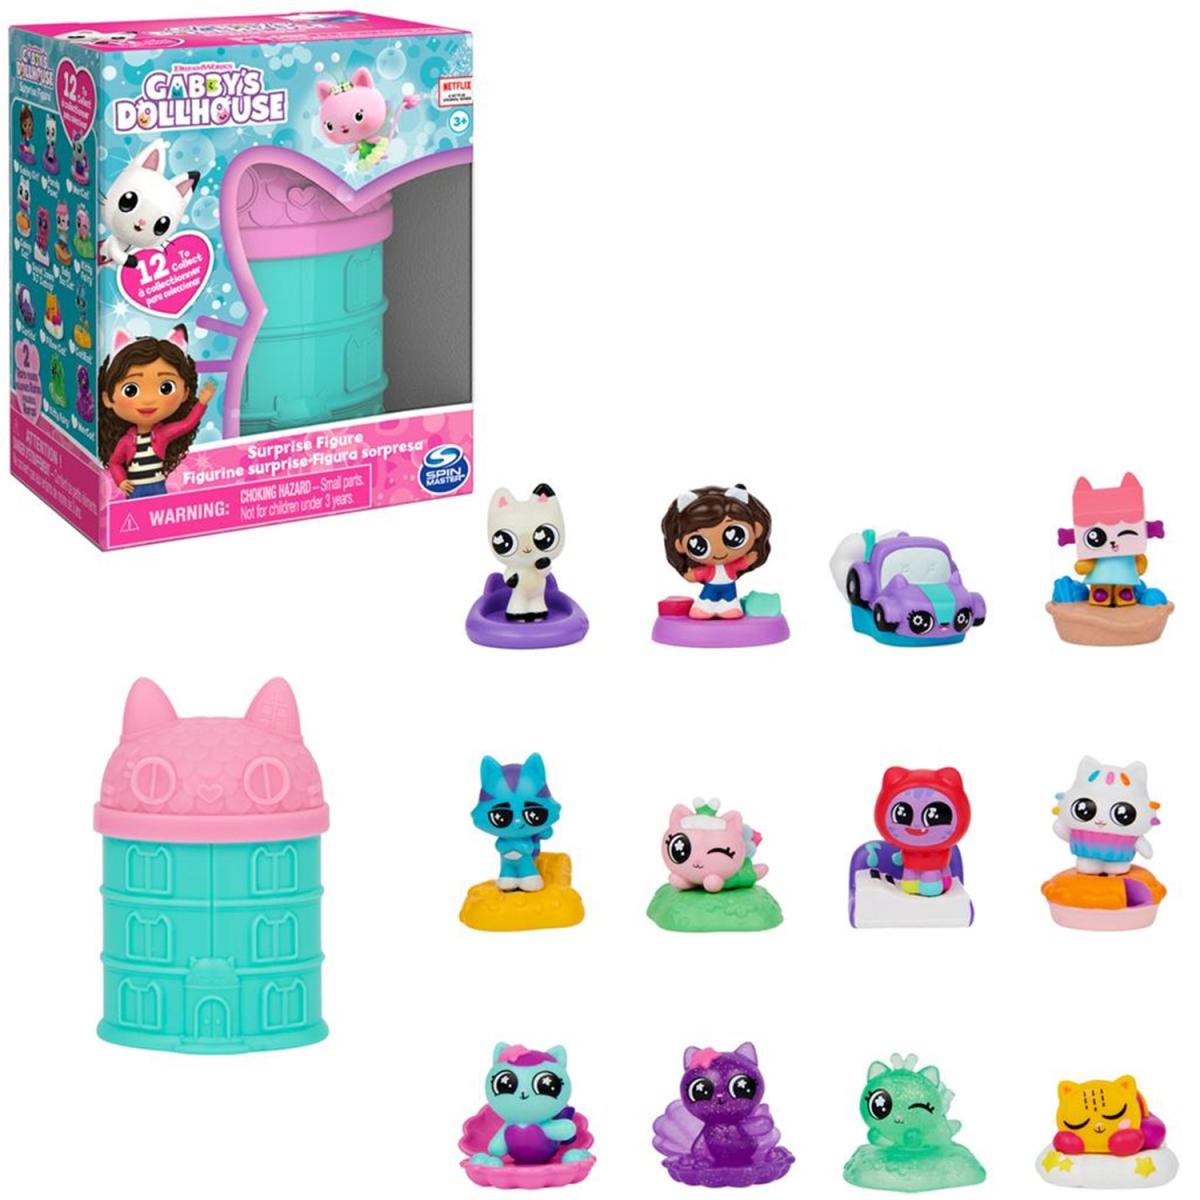 Spin Master - Gabby's Dollhouse, Surprise Figure assorted